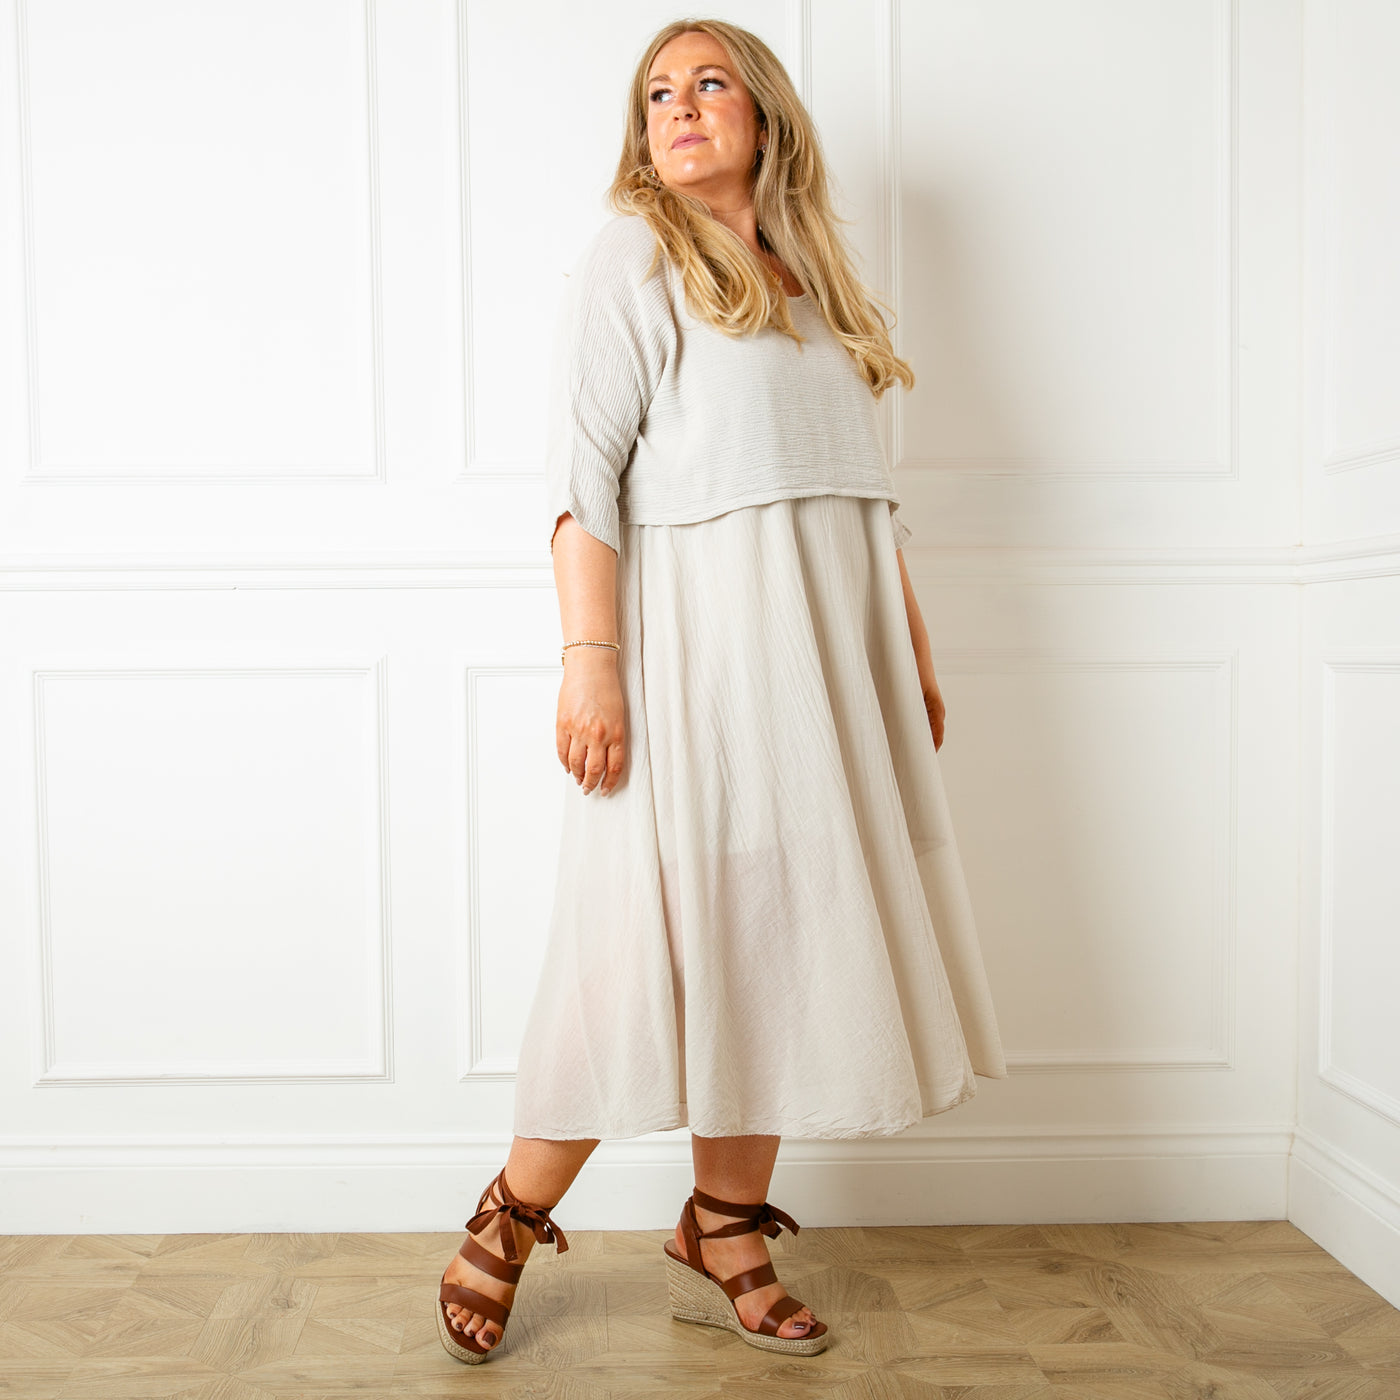 The stone cream Two Piece Dress with a top that has 3/4 length sleeves and a round neckline